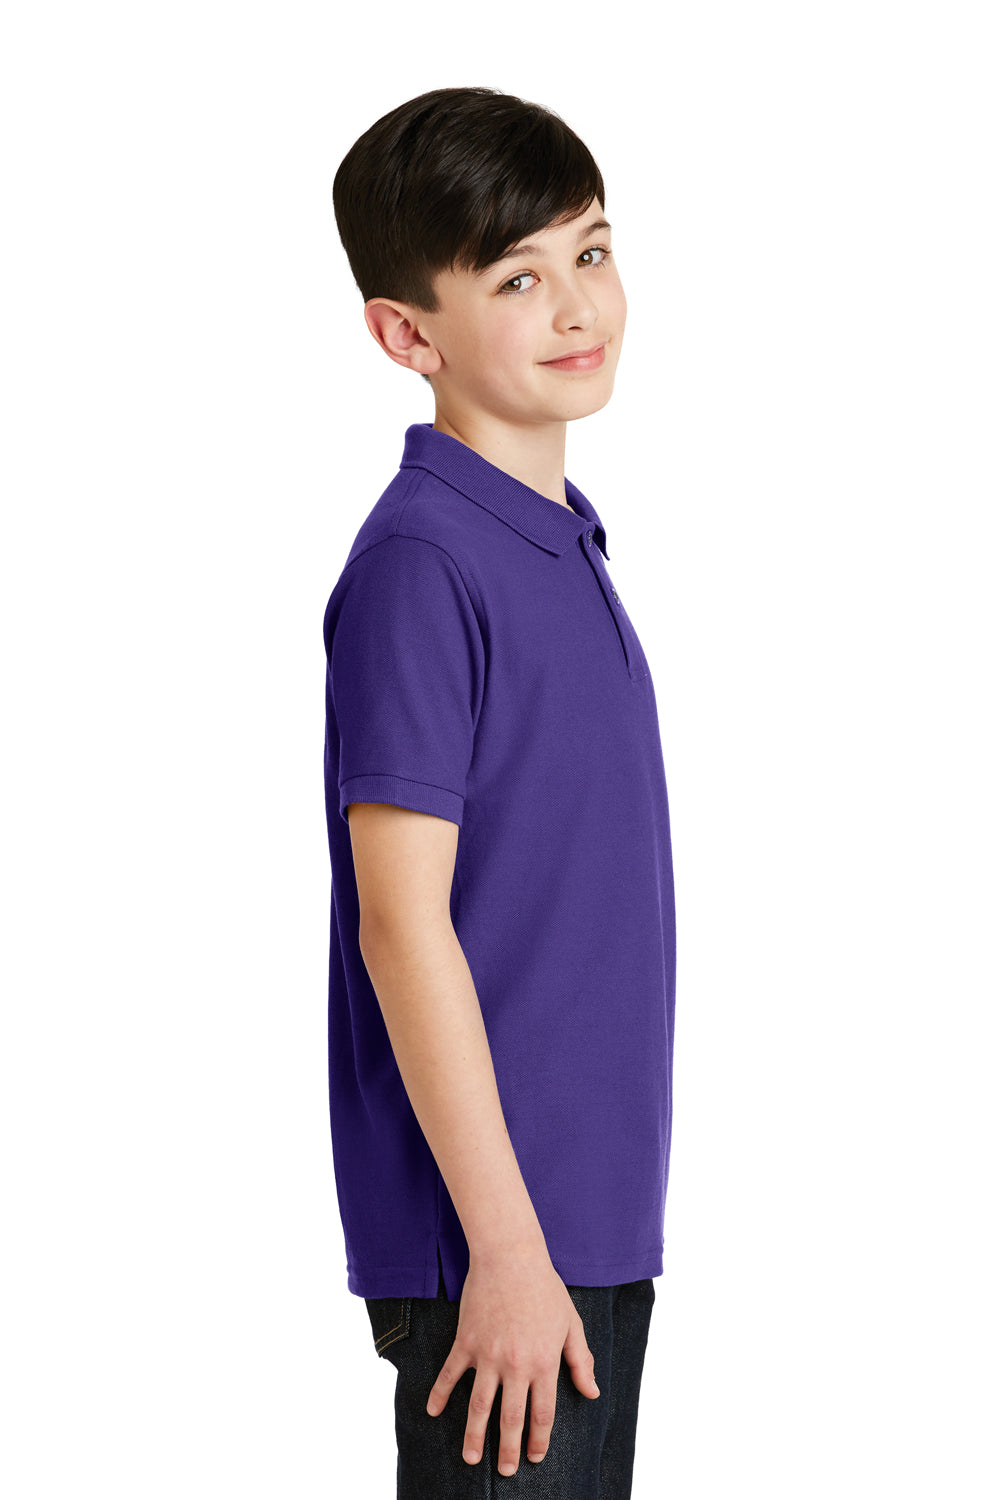 Port Authority Y500 Youth Silk Touch Wrinkle Resistant Short Sleeve Polo Shirt Purple Side